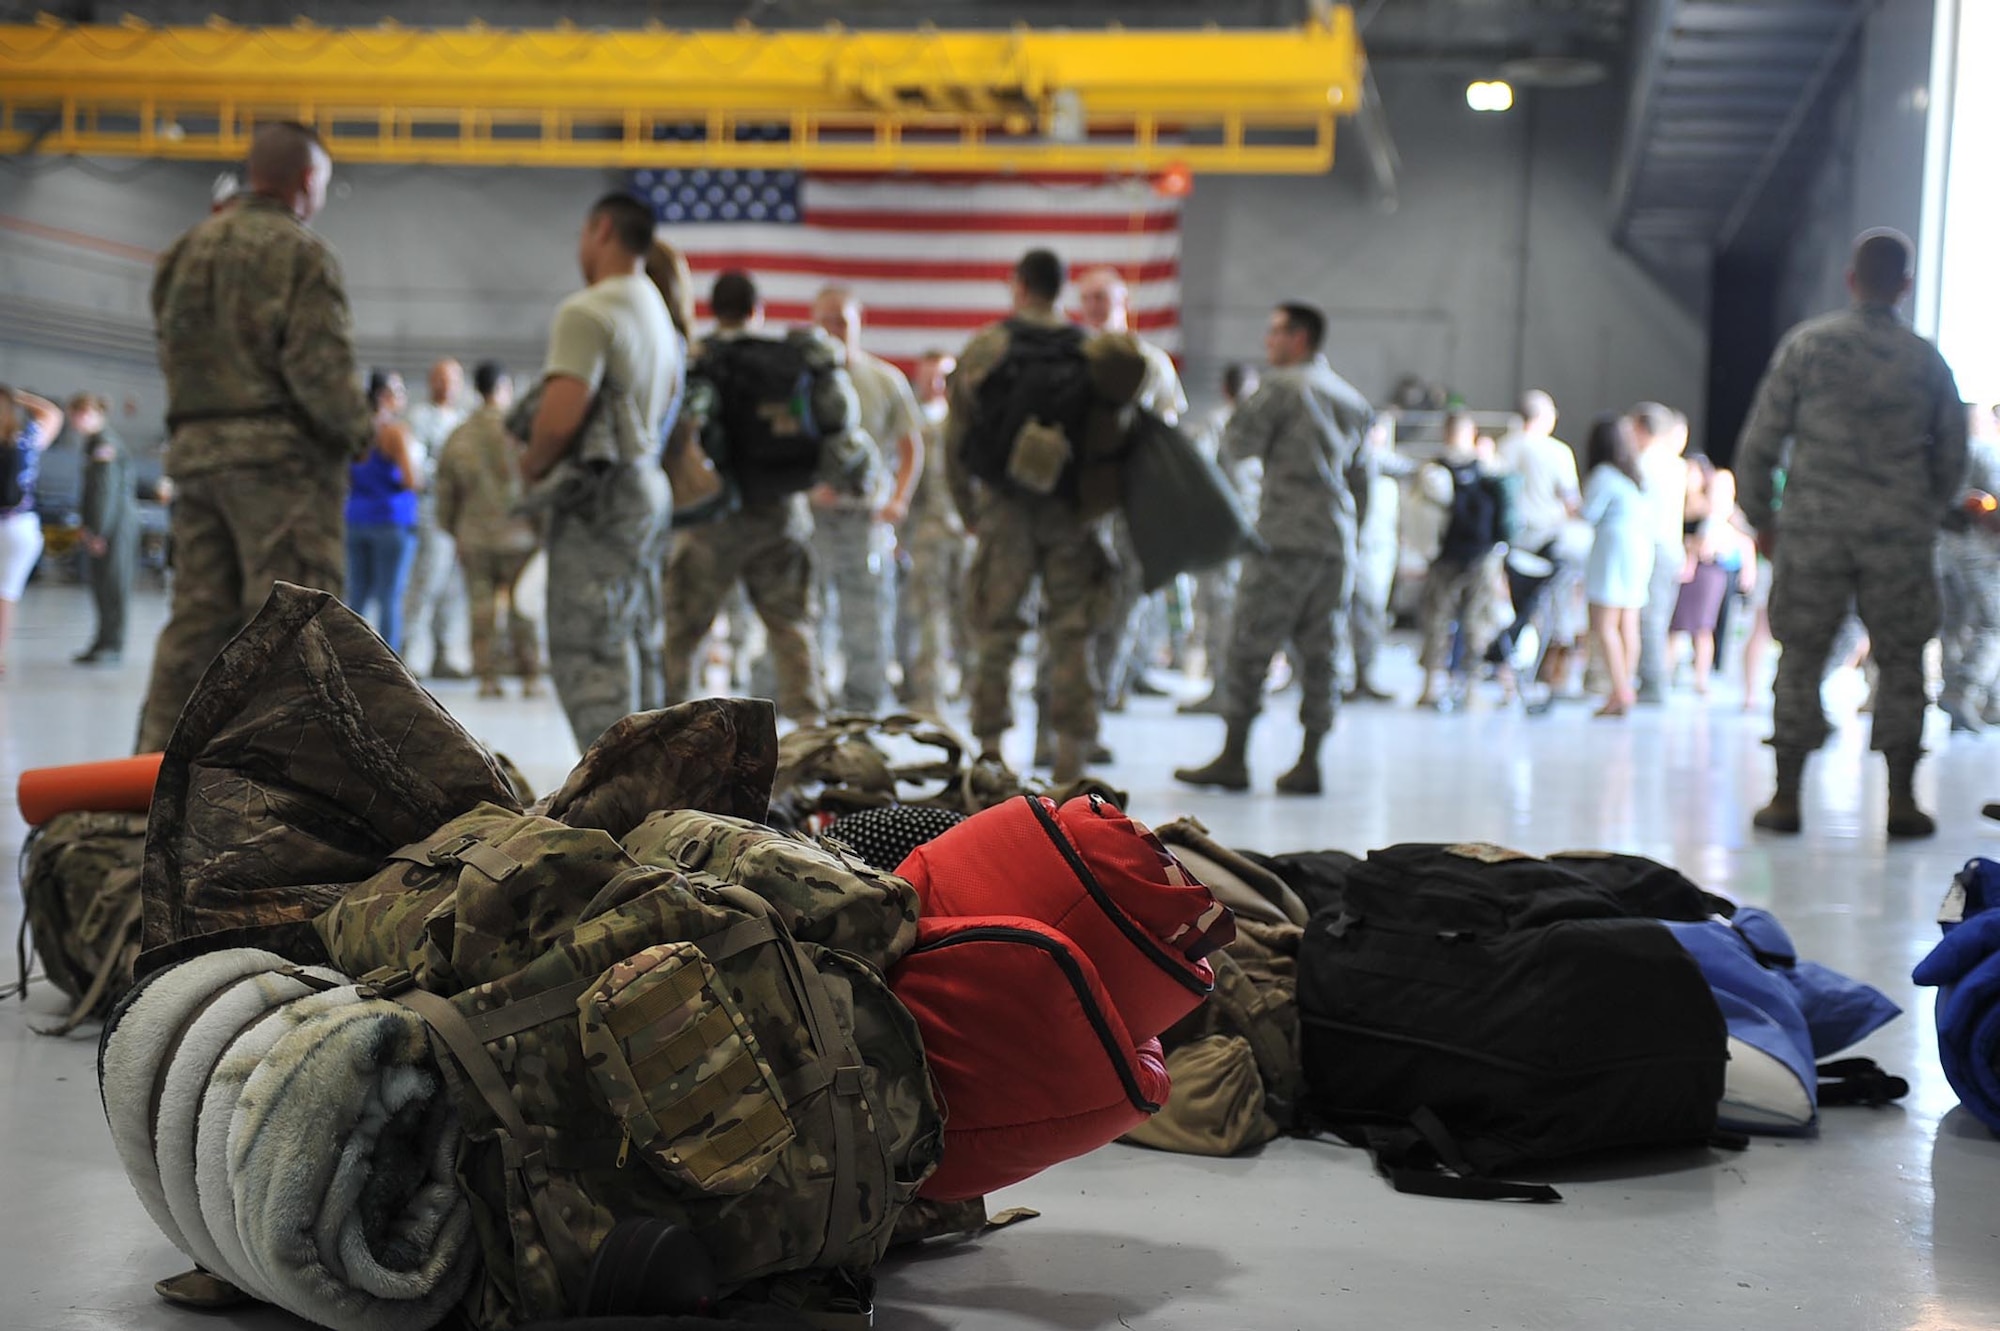 Bags rest on the 823rd Maintenance Squadron hangar floor at Nellis Air Force Base, Nev. Jun 7. Airmen from the 823rd MXG and 66th RQS spent the last four months in Afghanistan providing personnel recovery support. (U.S. Air Force photo by Senior Airman Rachel Loftis)